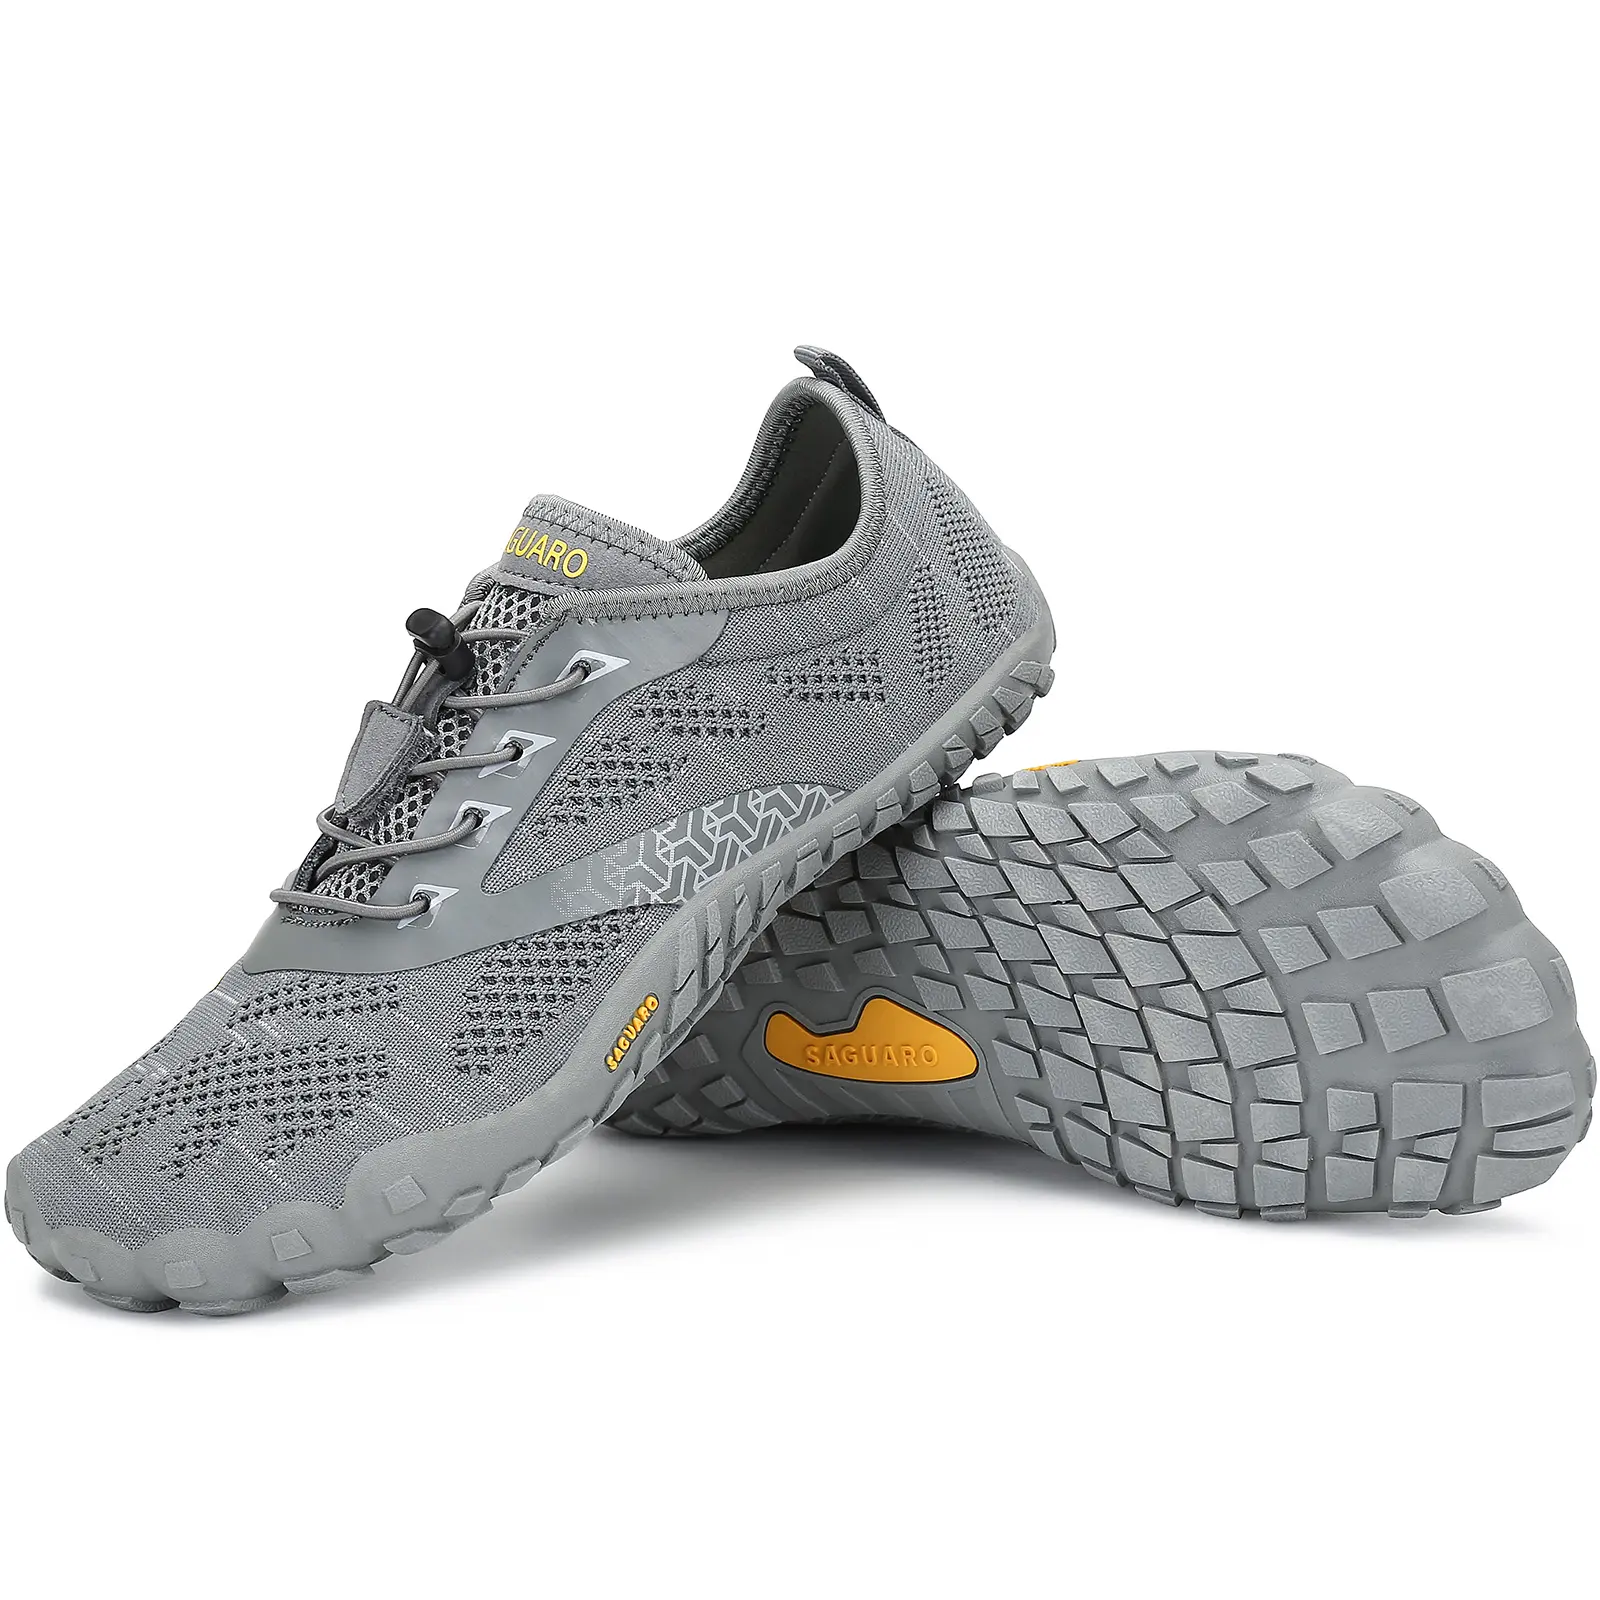 Grey Breathable Grid Rubber bottom Trail Barefoot Running Shoes for Men